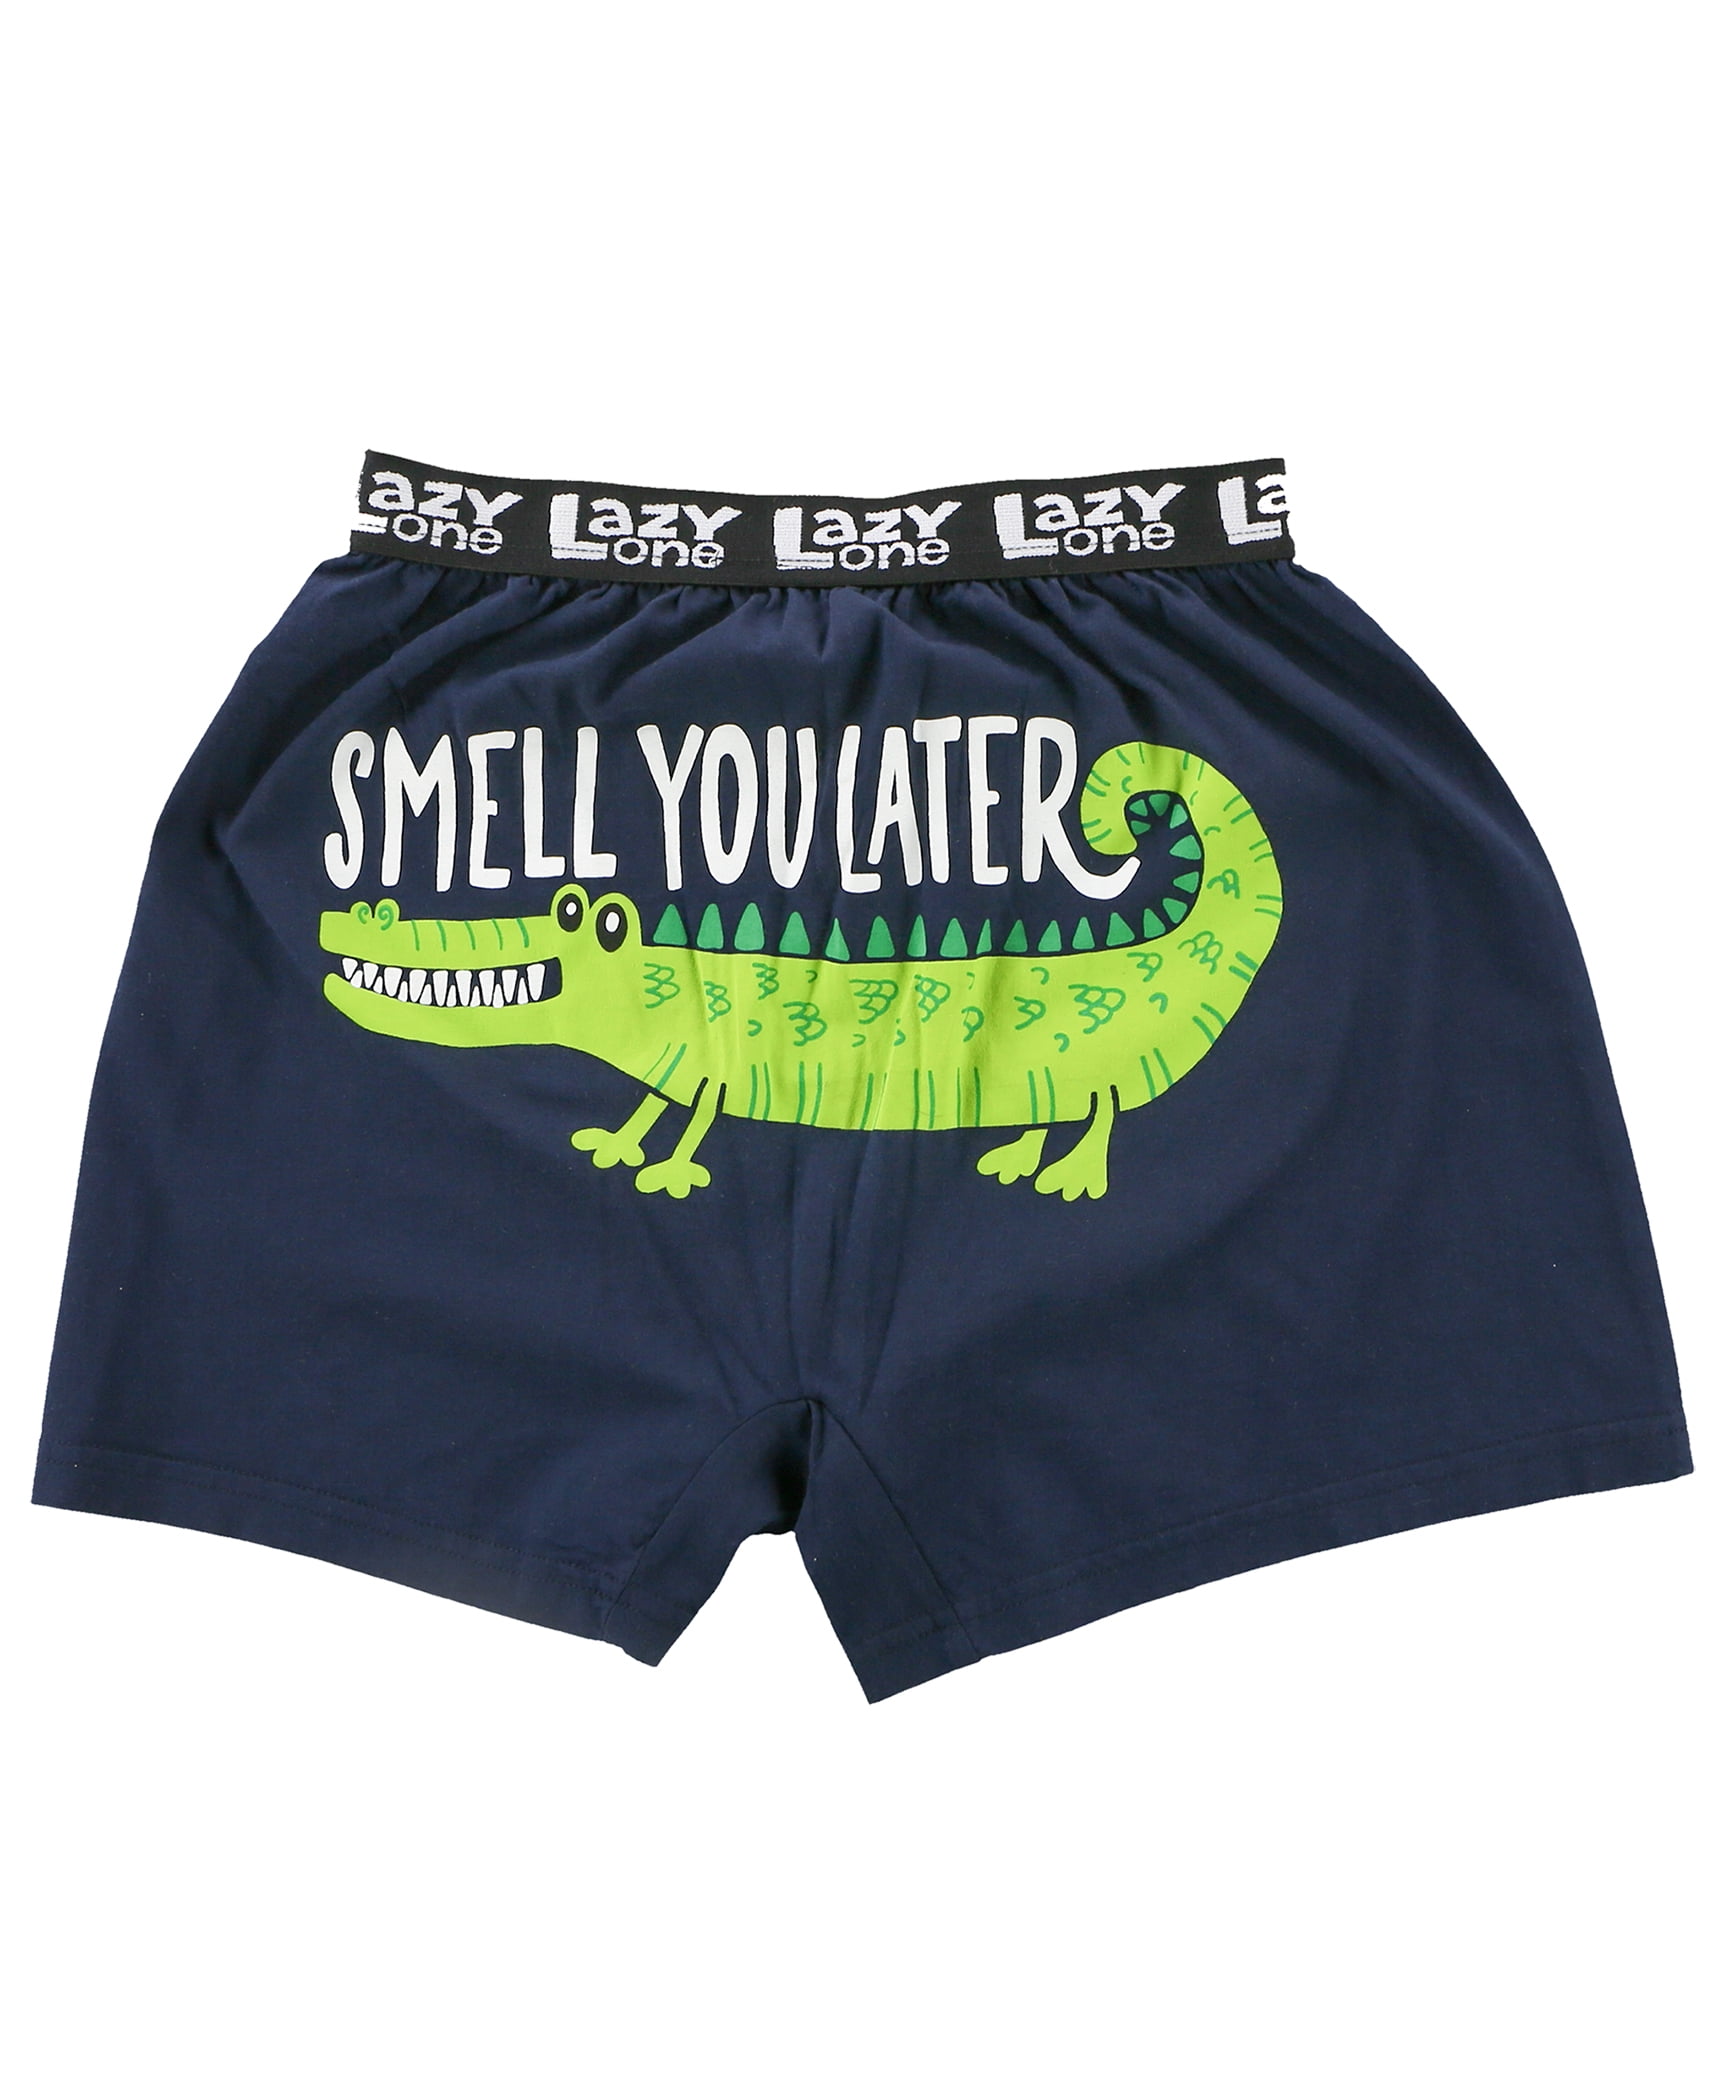 LazyOne Funny Animal Boxers, Novelty Boxer Shorts, Humorous Kids'  Underwear, Gag Gifts for Boys, Alligator (Smell You Later Kid Boxer, Small)